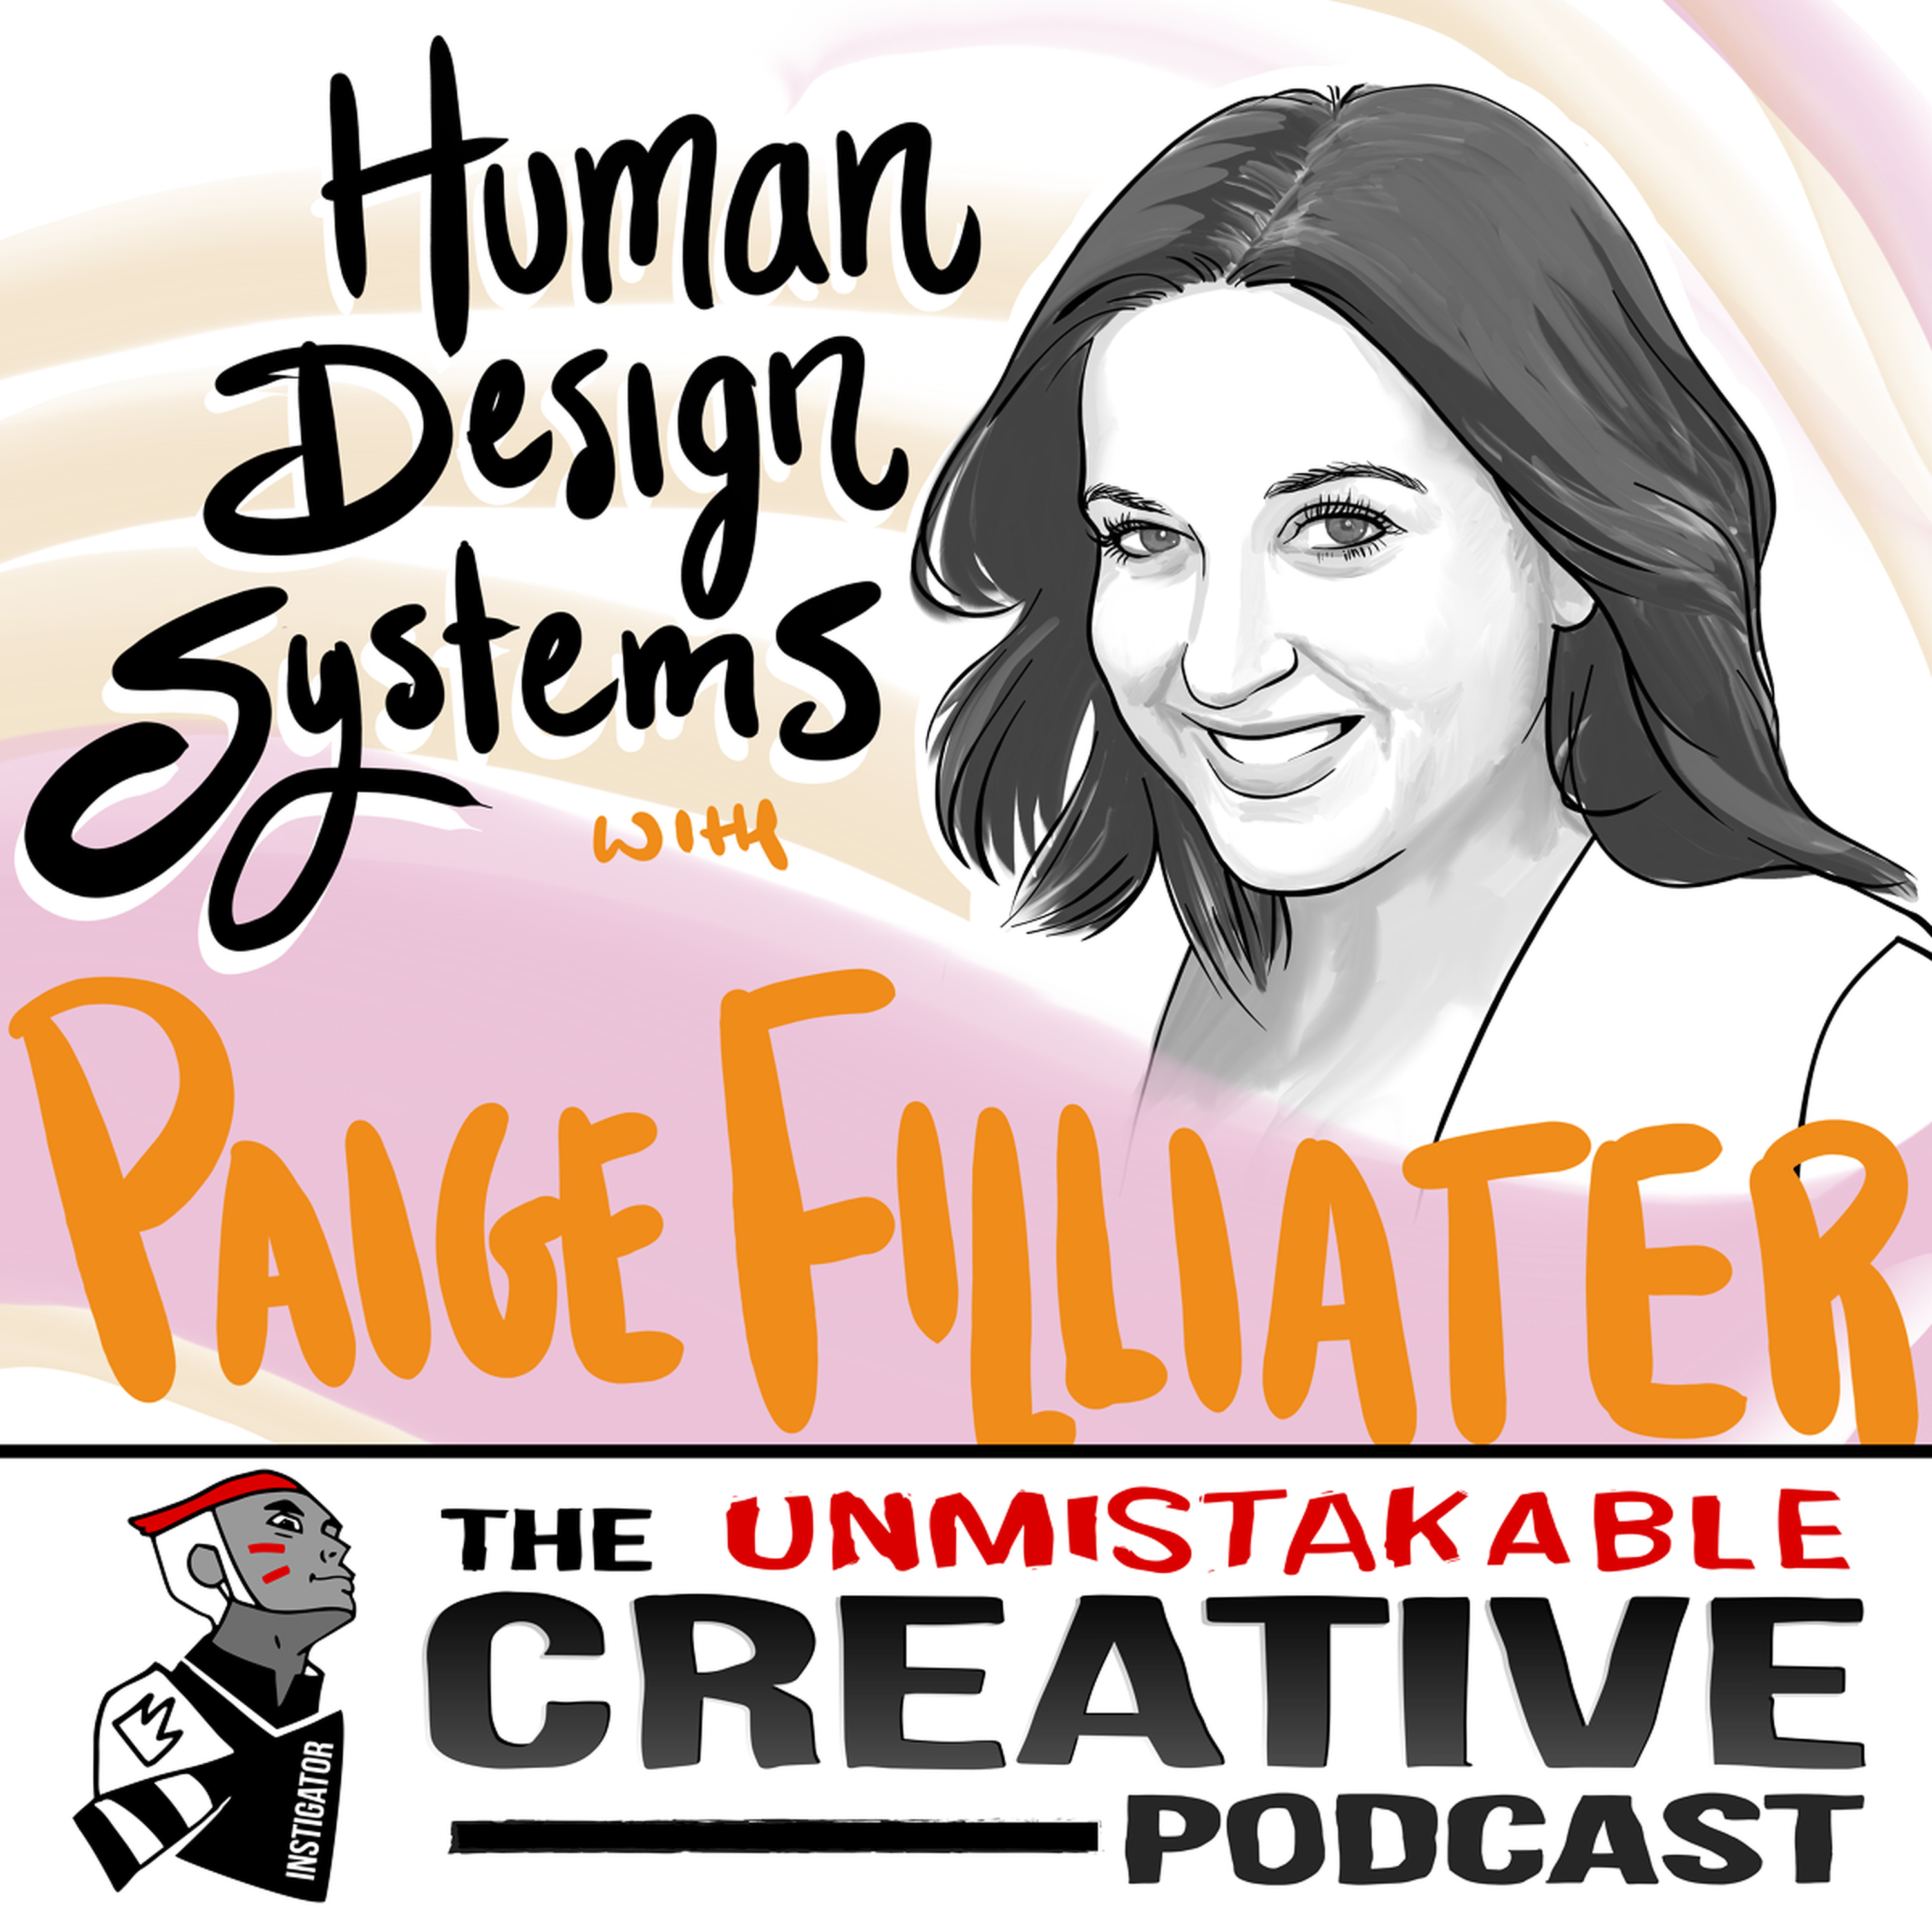 Paige Filliater: Human Design Systems Image